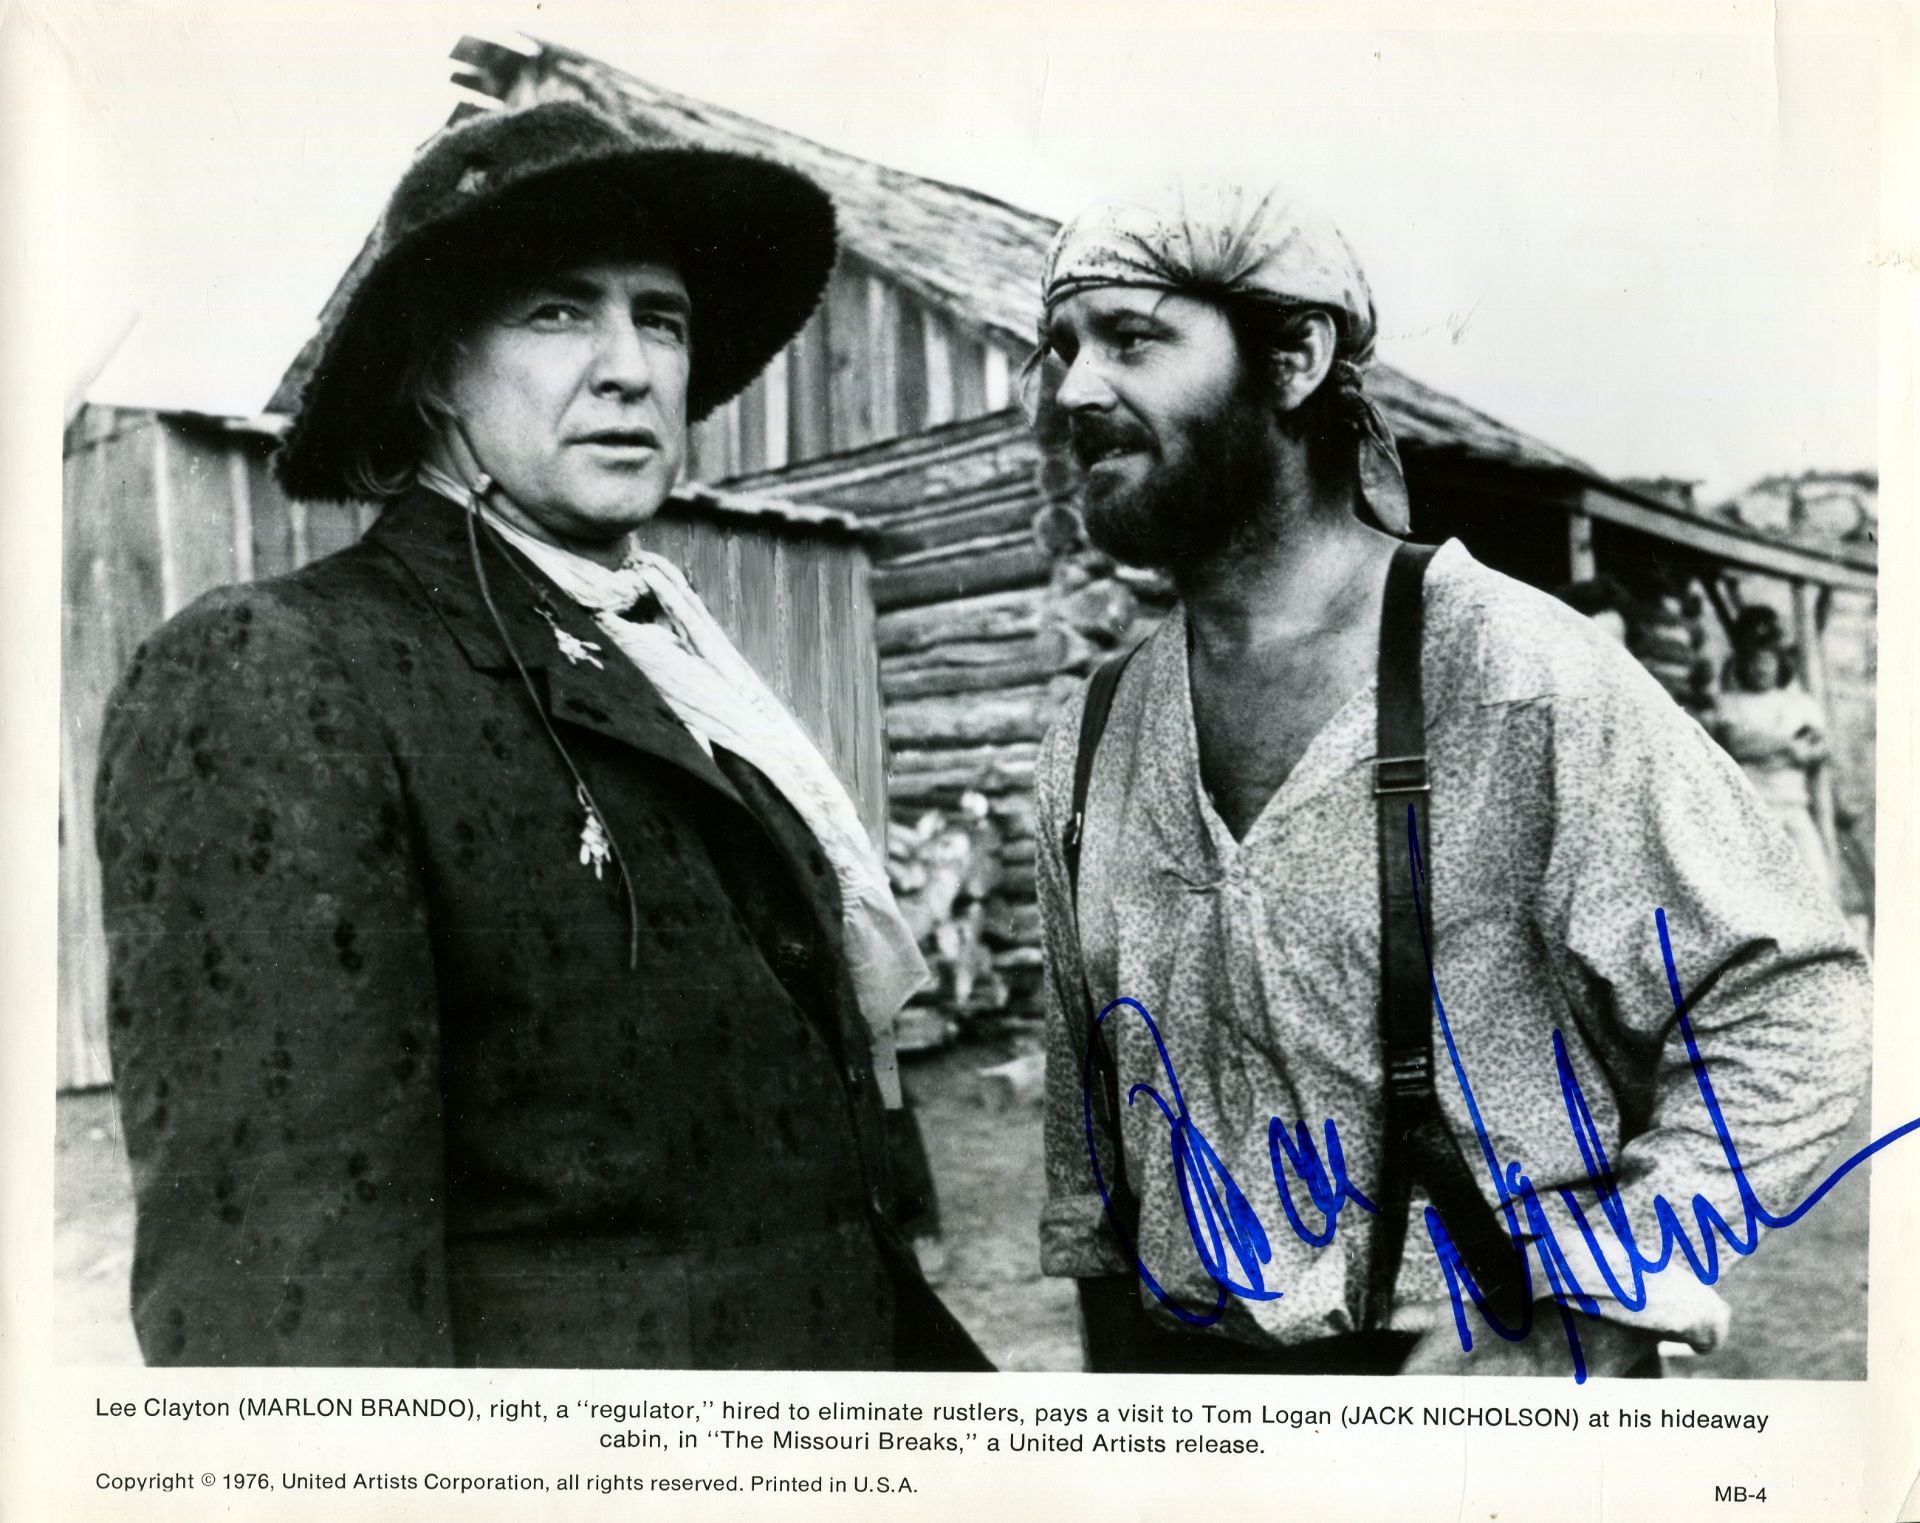 ACADEMY AWARD WINNERS: Selection of signed 8 x 10 photographs by various Oscar winning film actors - Image 6 of 6